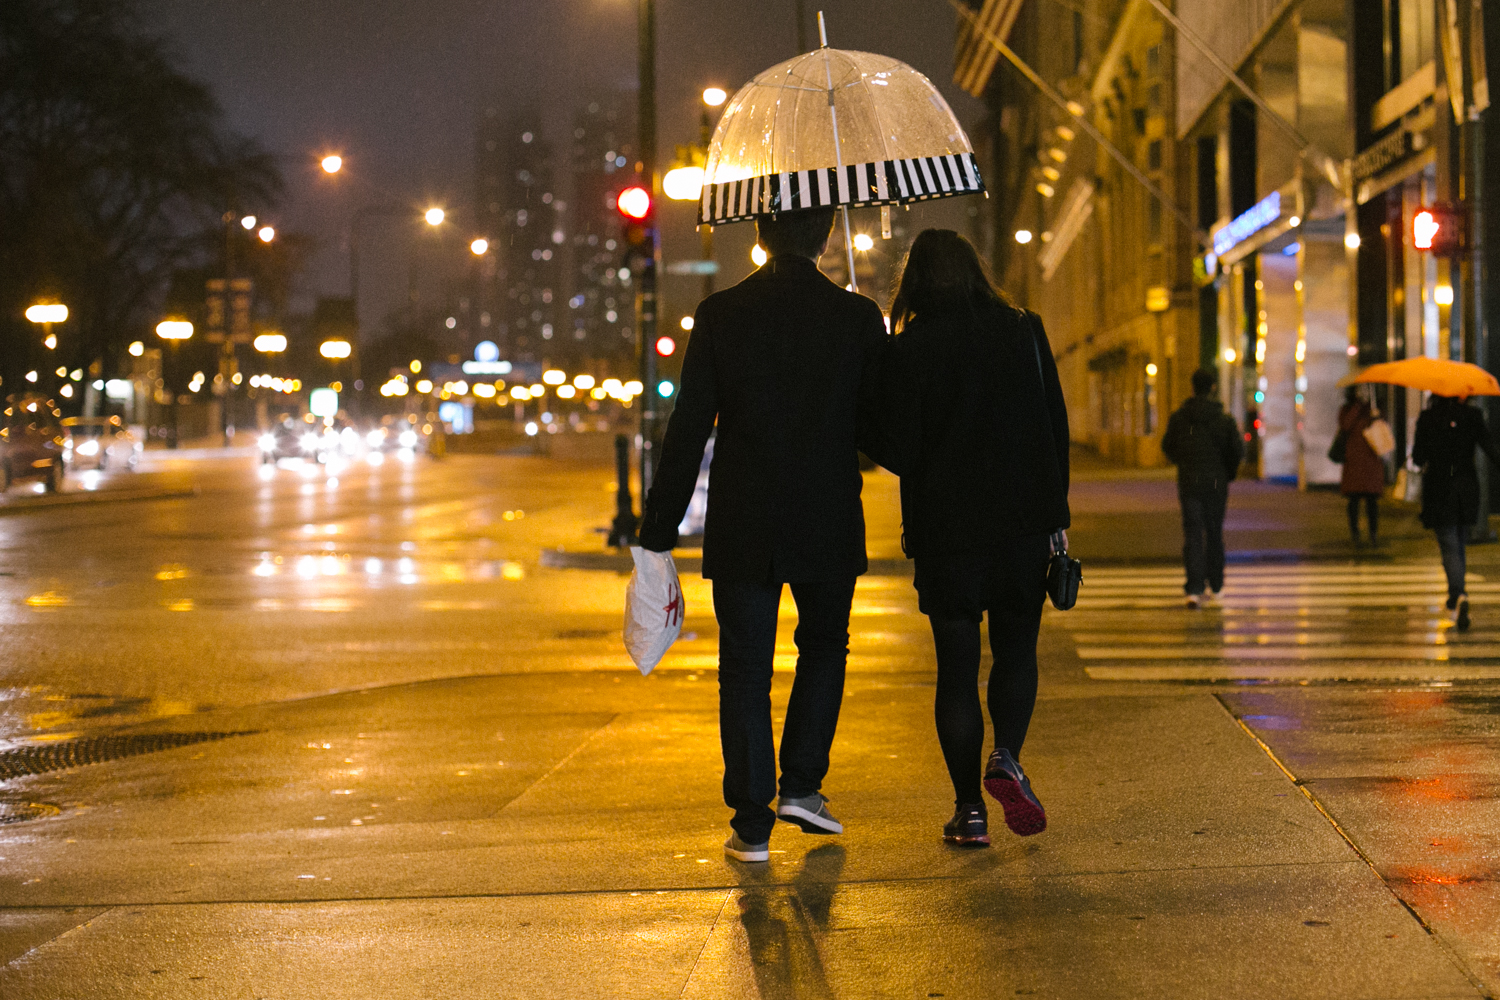  Update: halfway though and the rain is really coming down. Hun Ho and his girlfriend, Samantha share an umbrella on their way back to the dorms. 12/24 